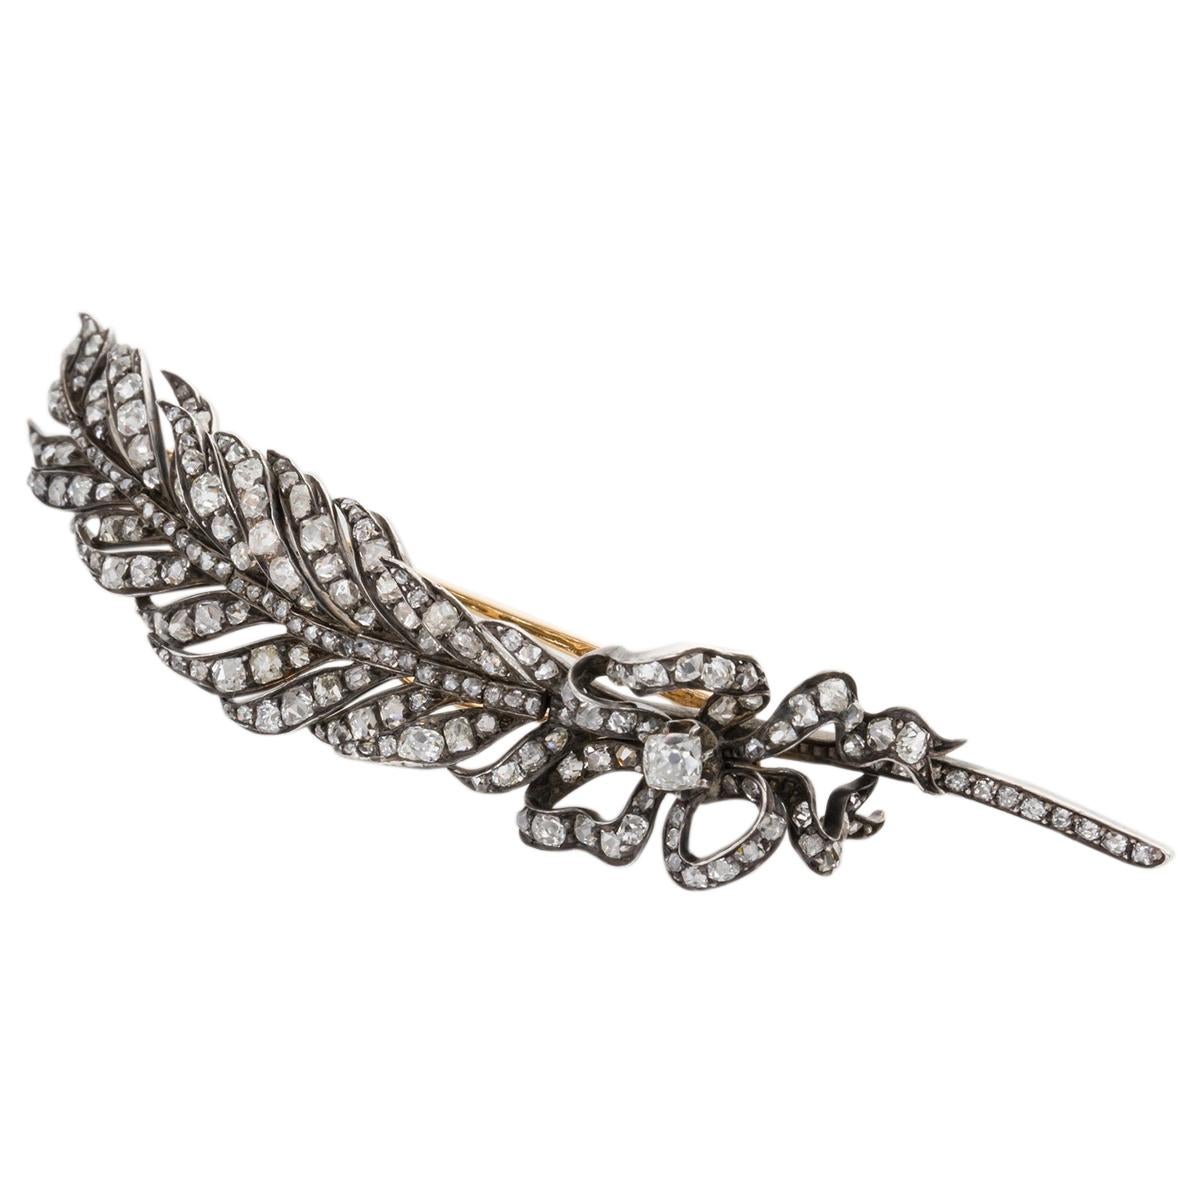 Circa 1895 - A stunning antique feather pin that is reminiscent of times gone by, it is a jewel that looks like it should be in a museum it's that beautiful and displays superb craftsmanship. Let's start with the 4.35cts of old mine & rose cut